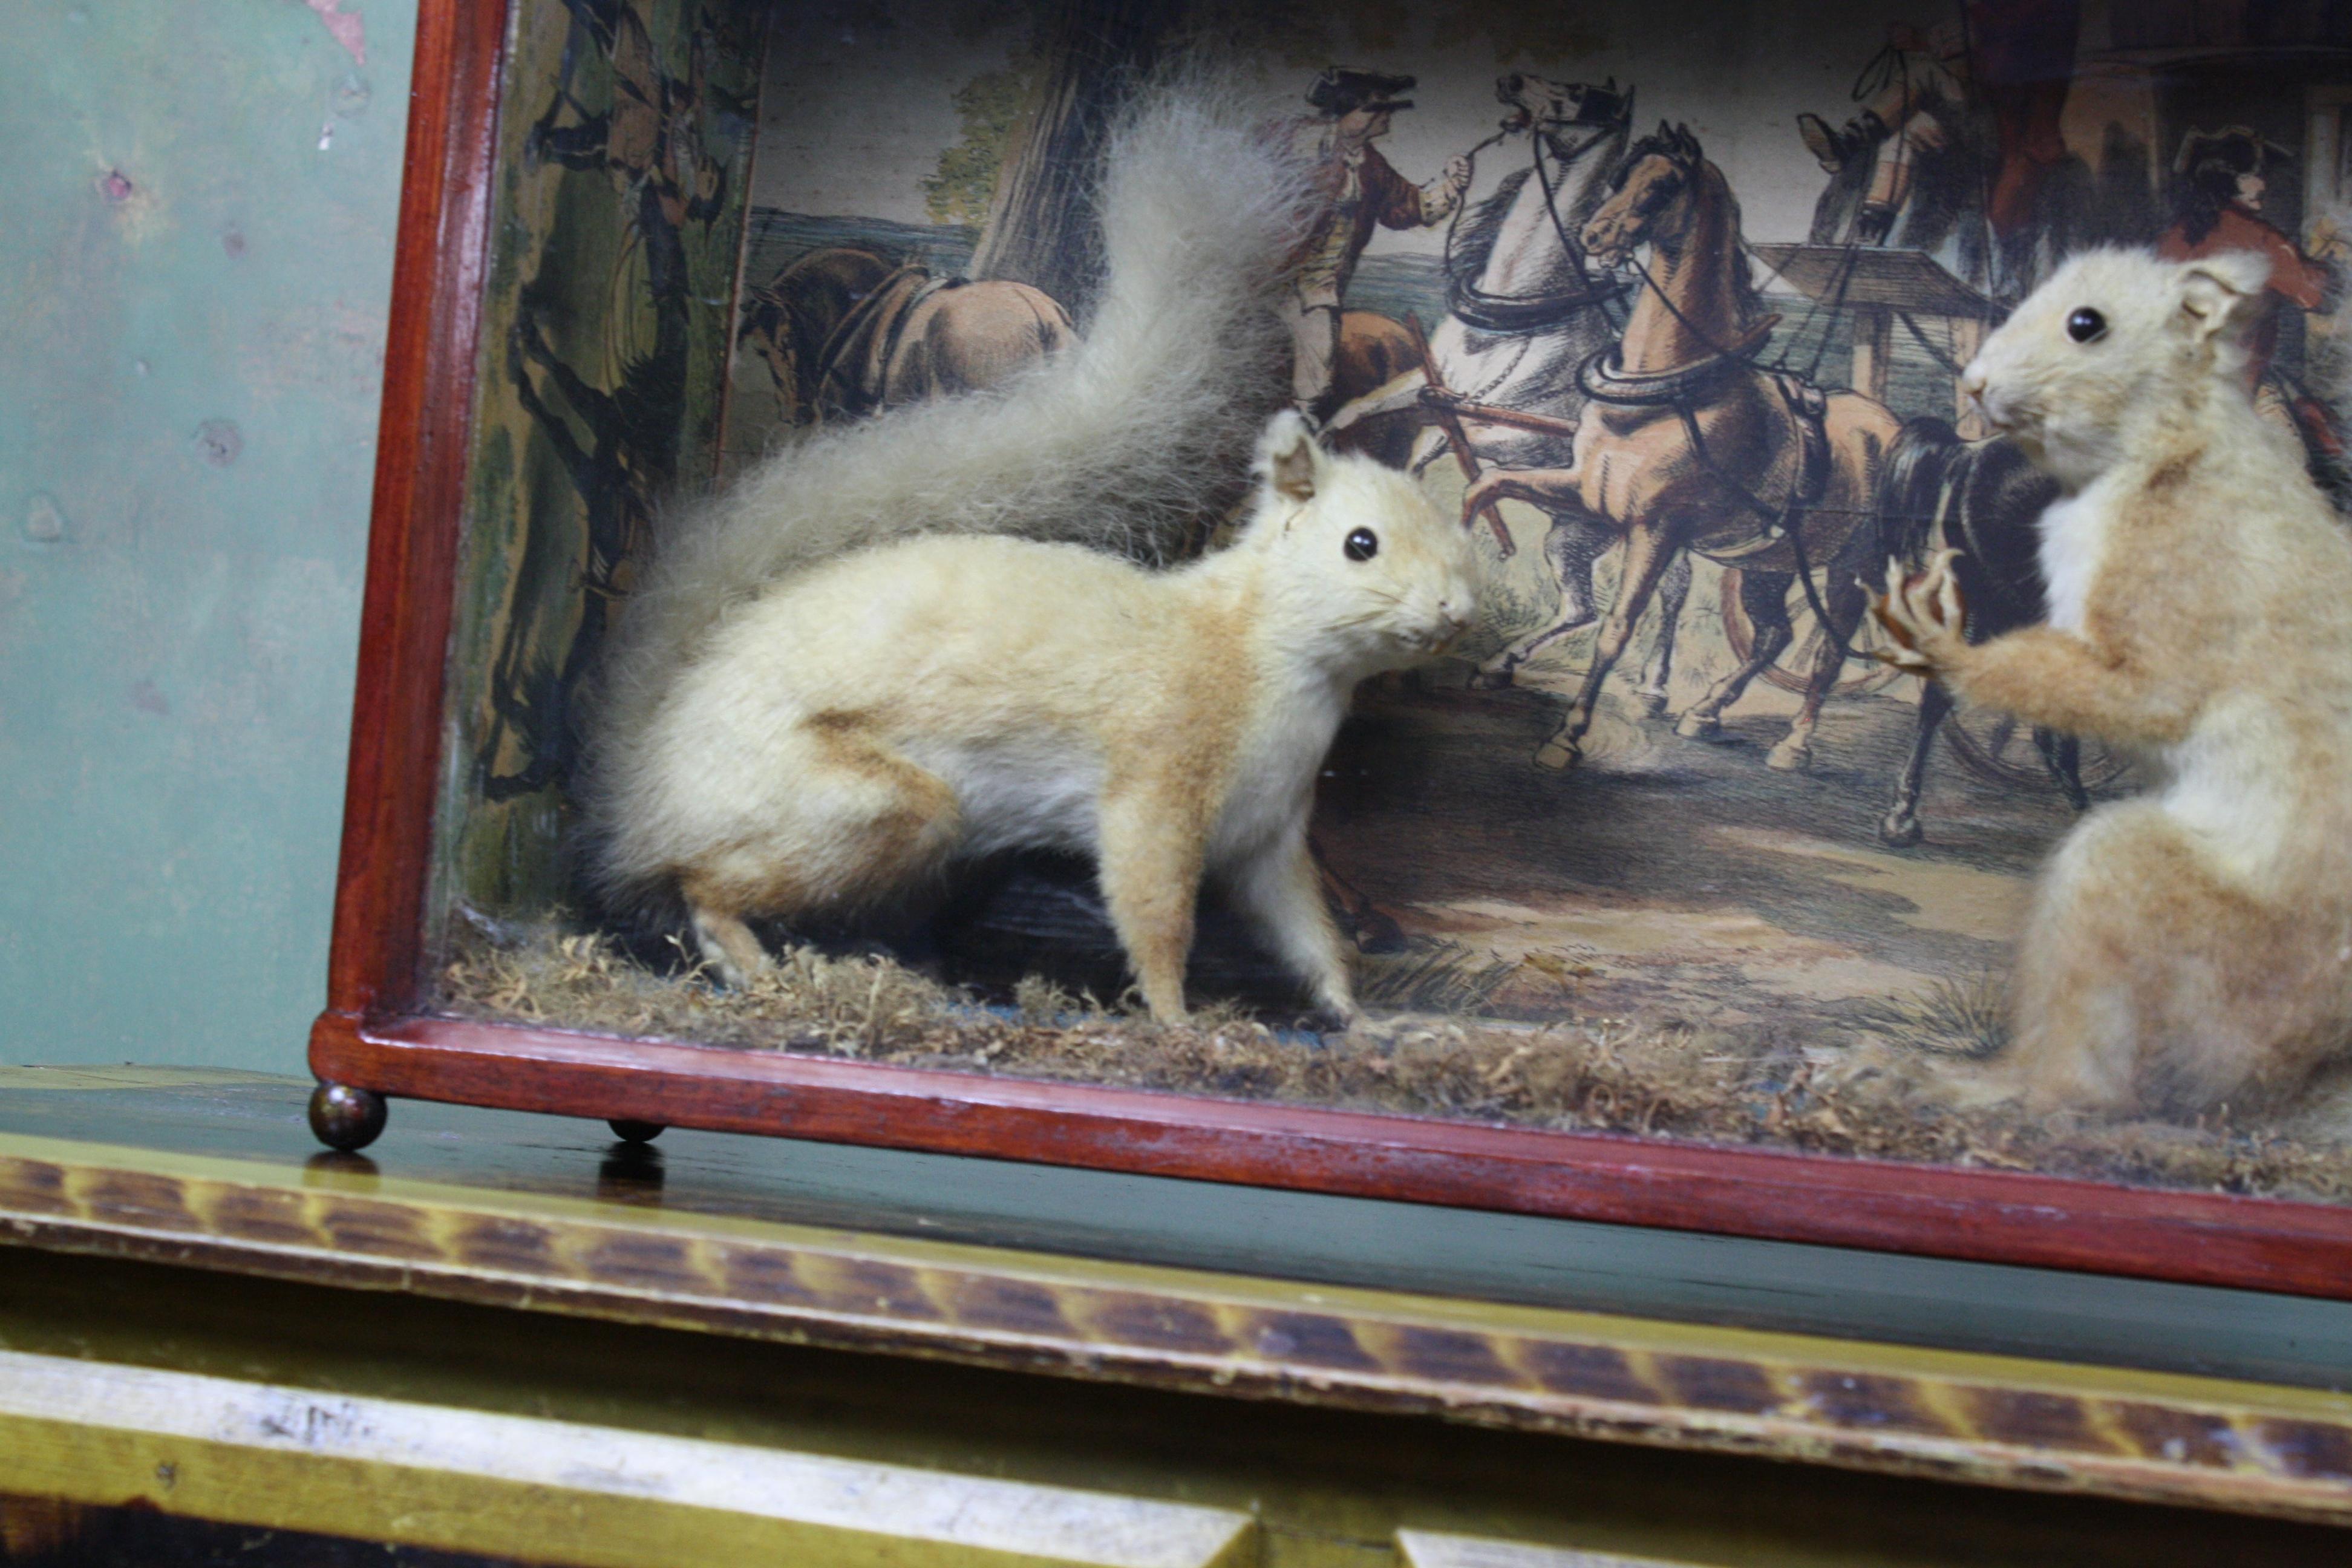 Unusual pair of red squirrels, well preserved and mounted on a naturalistic ground with one squirrel holding a hazel nut. The back drop is a decoupage scene of a Georgian robbery with the victims being help up at gun point. 

Housed in a pine